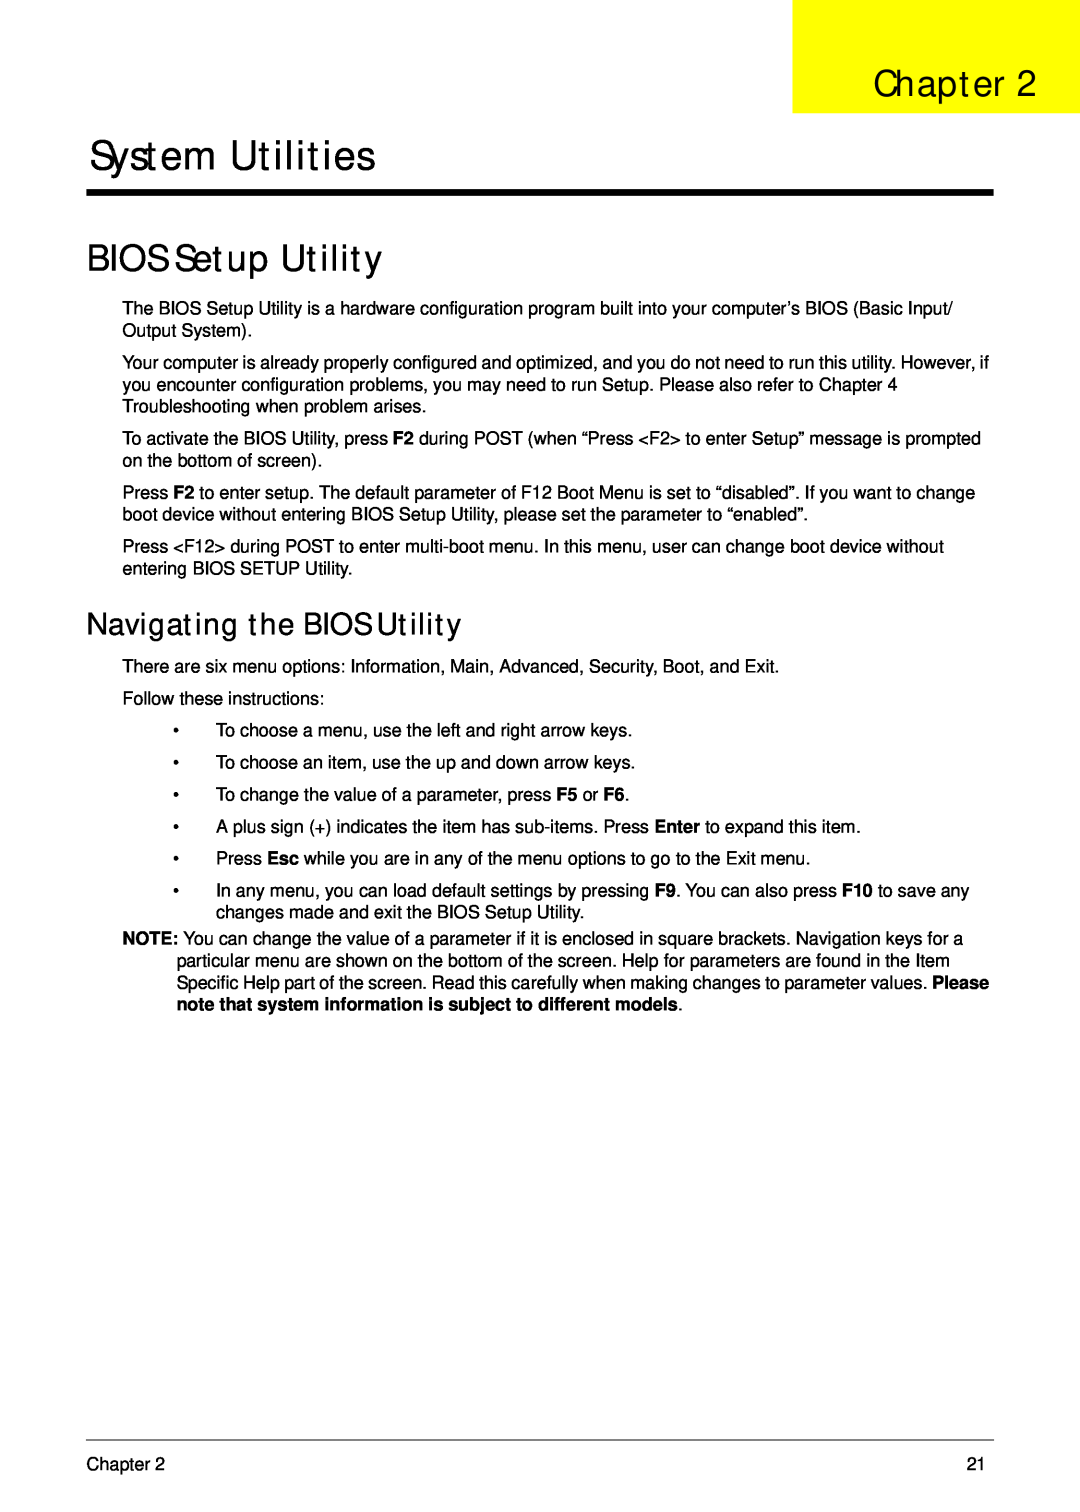 Acer 7315, 7715Z manual System Utilities, BIOS Setup Utility, Navigating the BIOS Utility, Chapter 